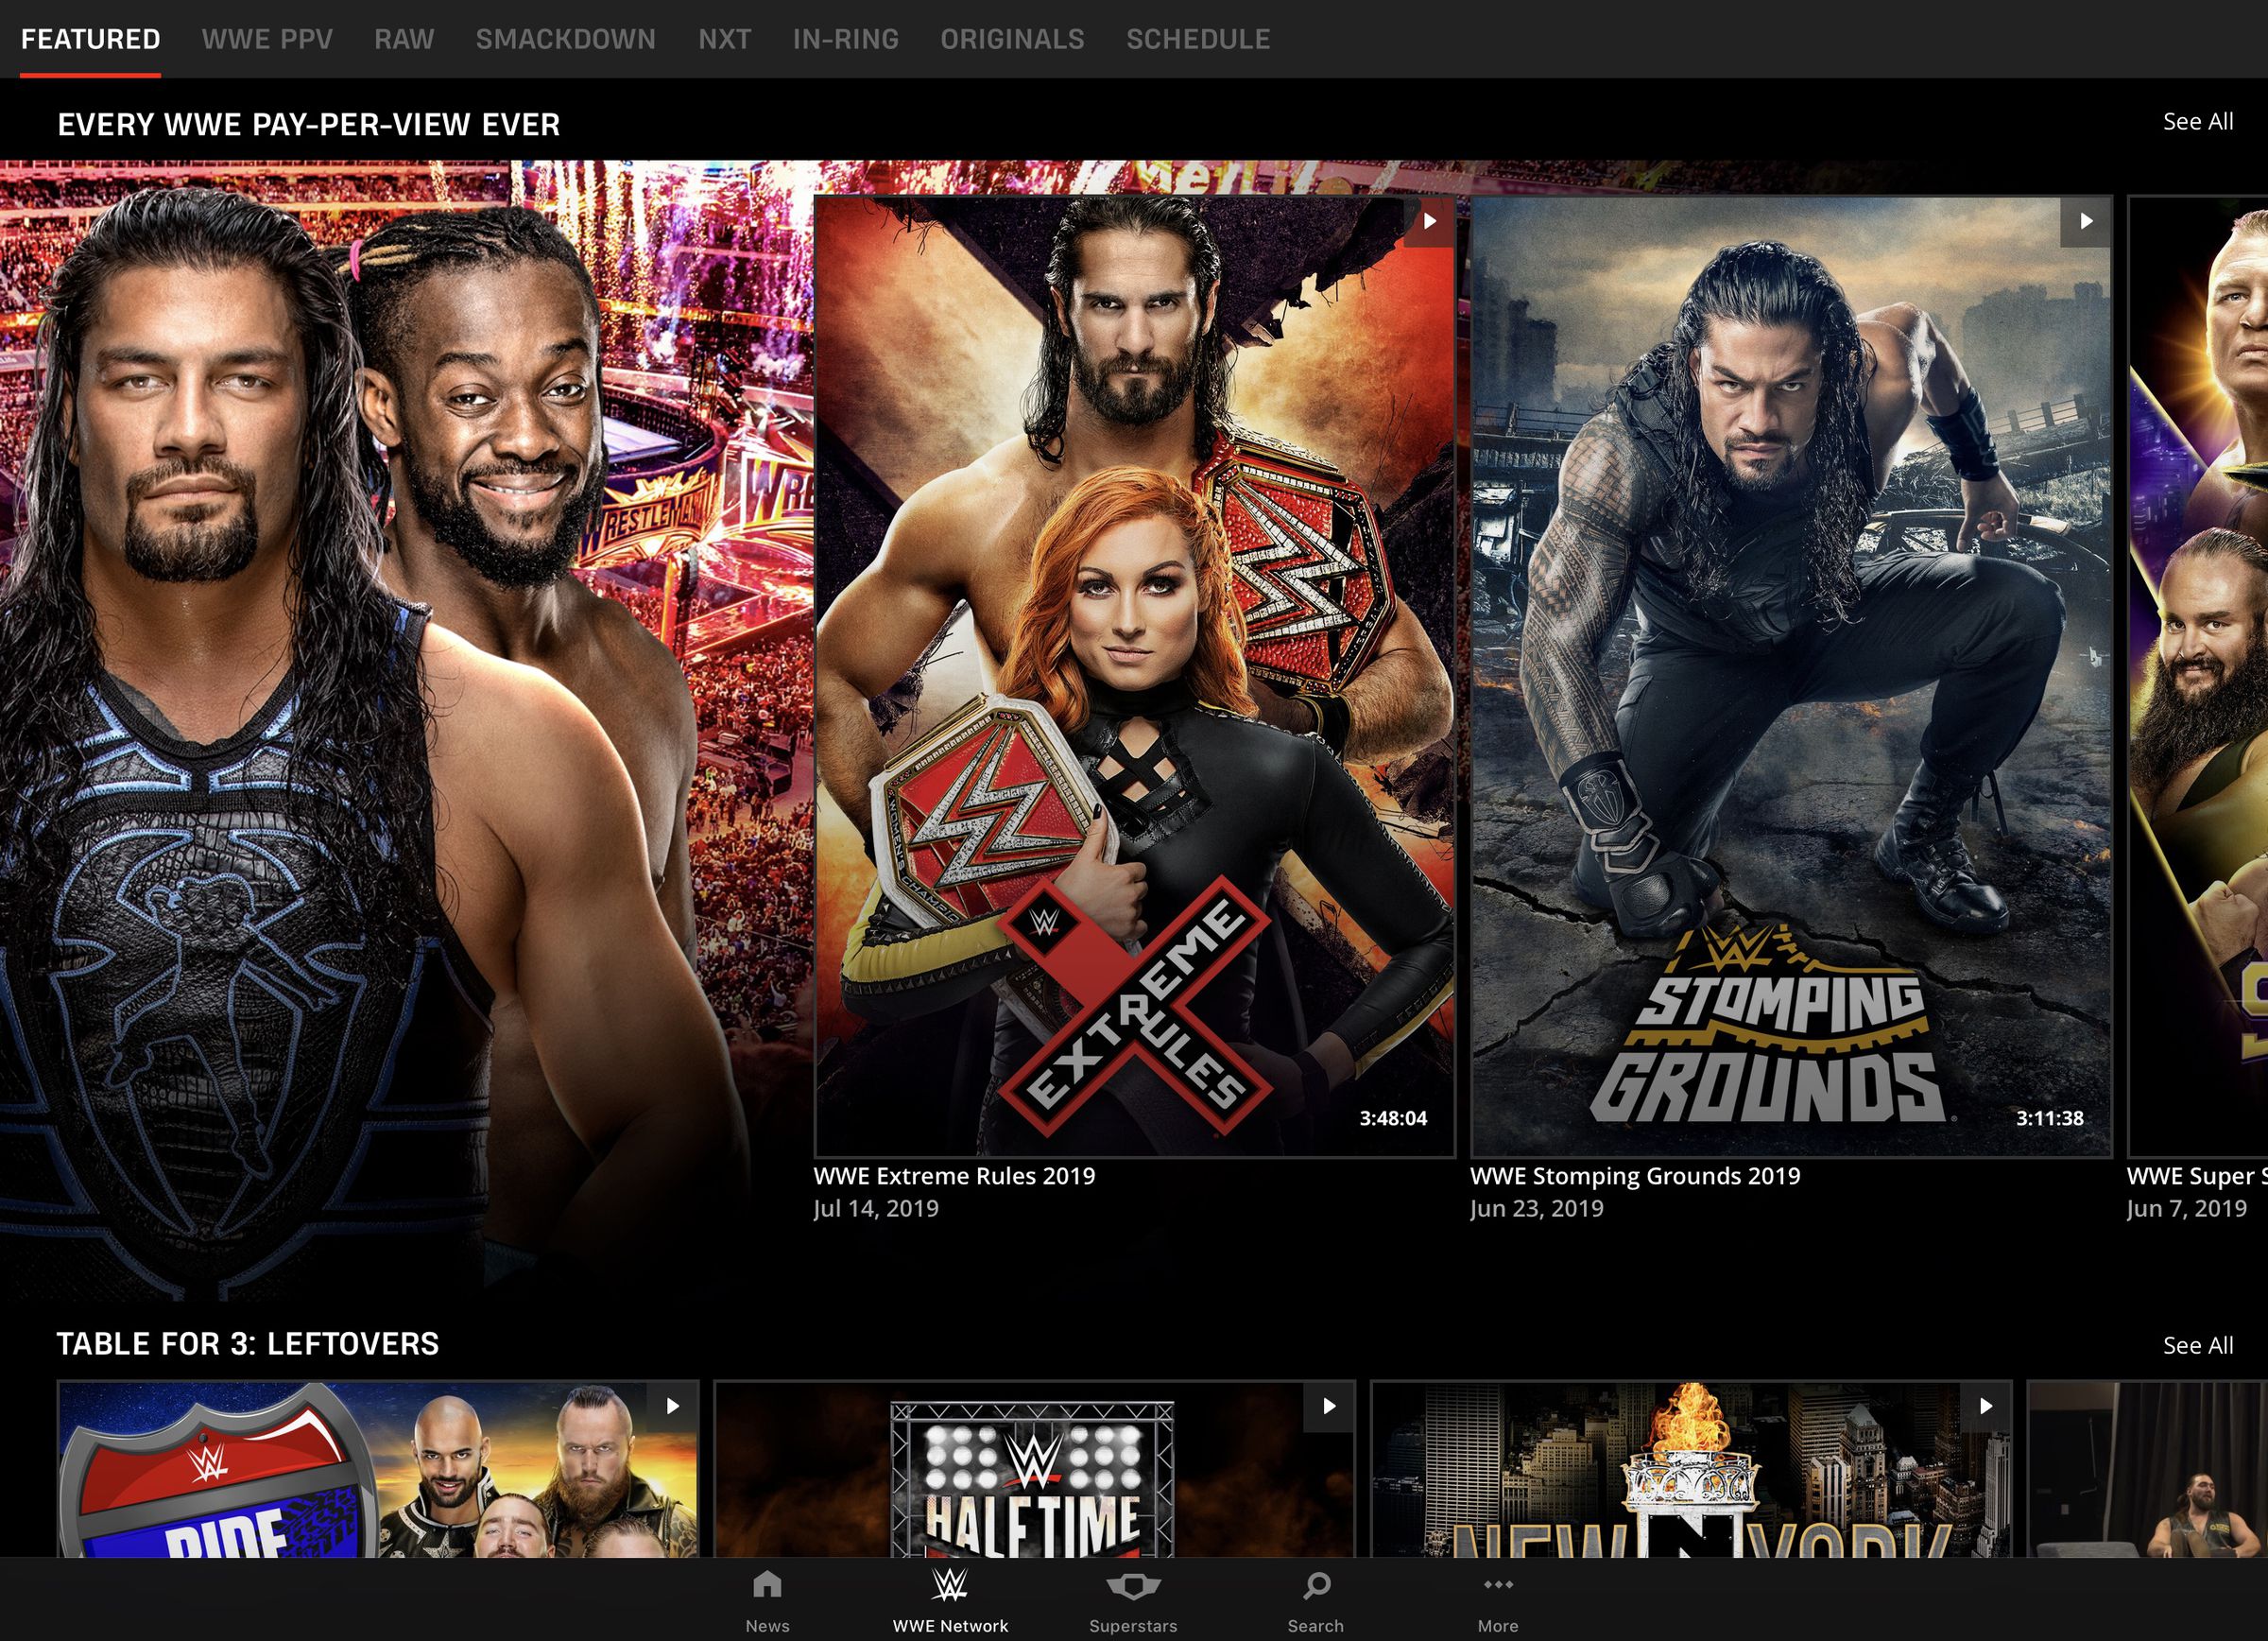 The new WWE Network experience on an iPad.